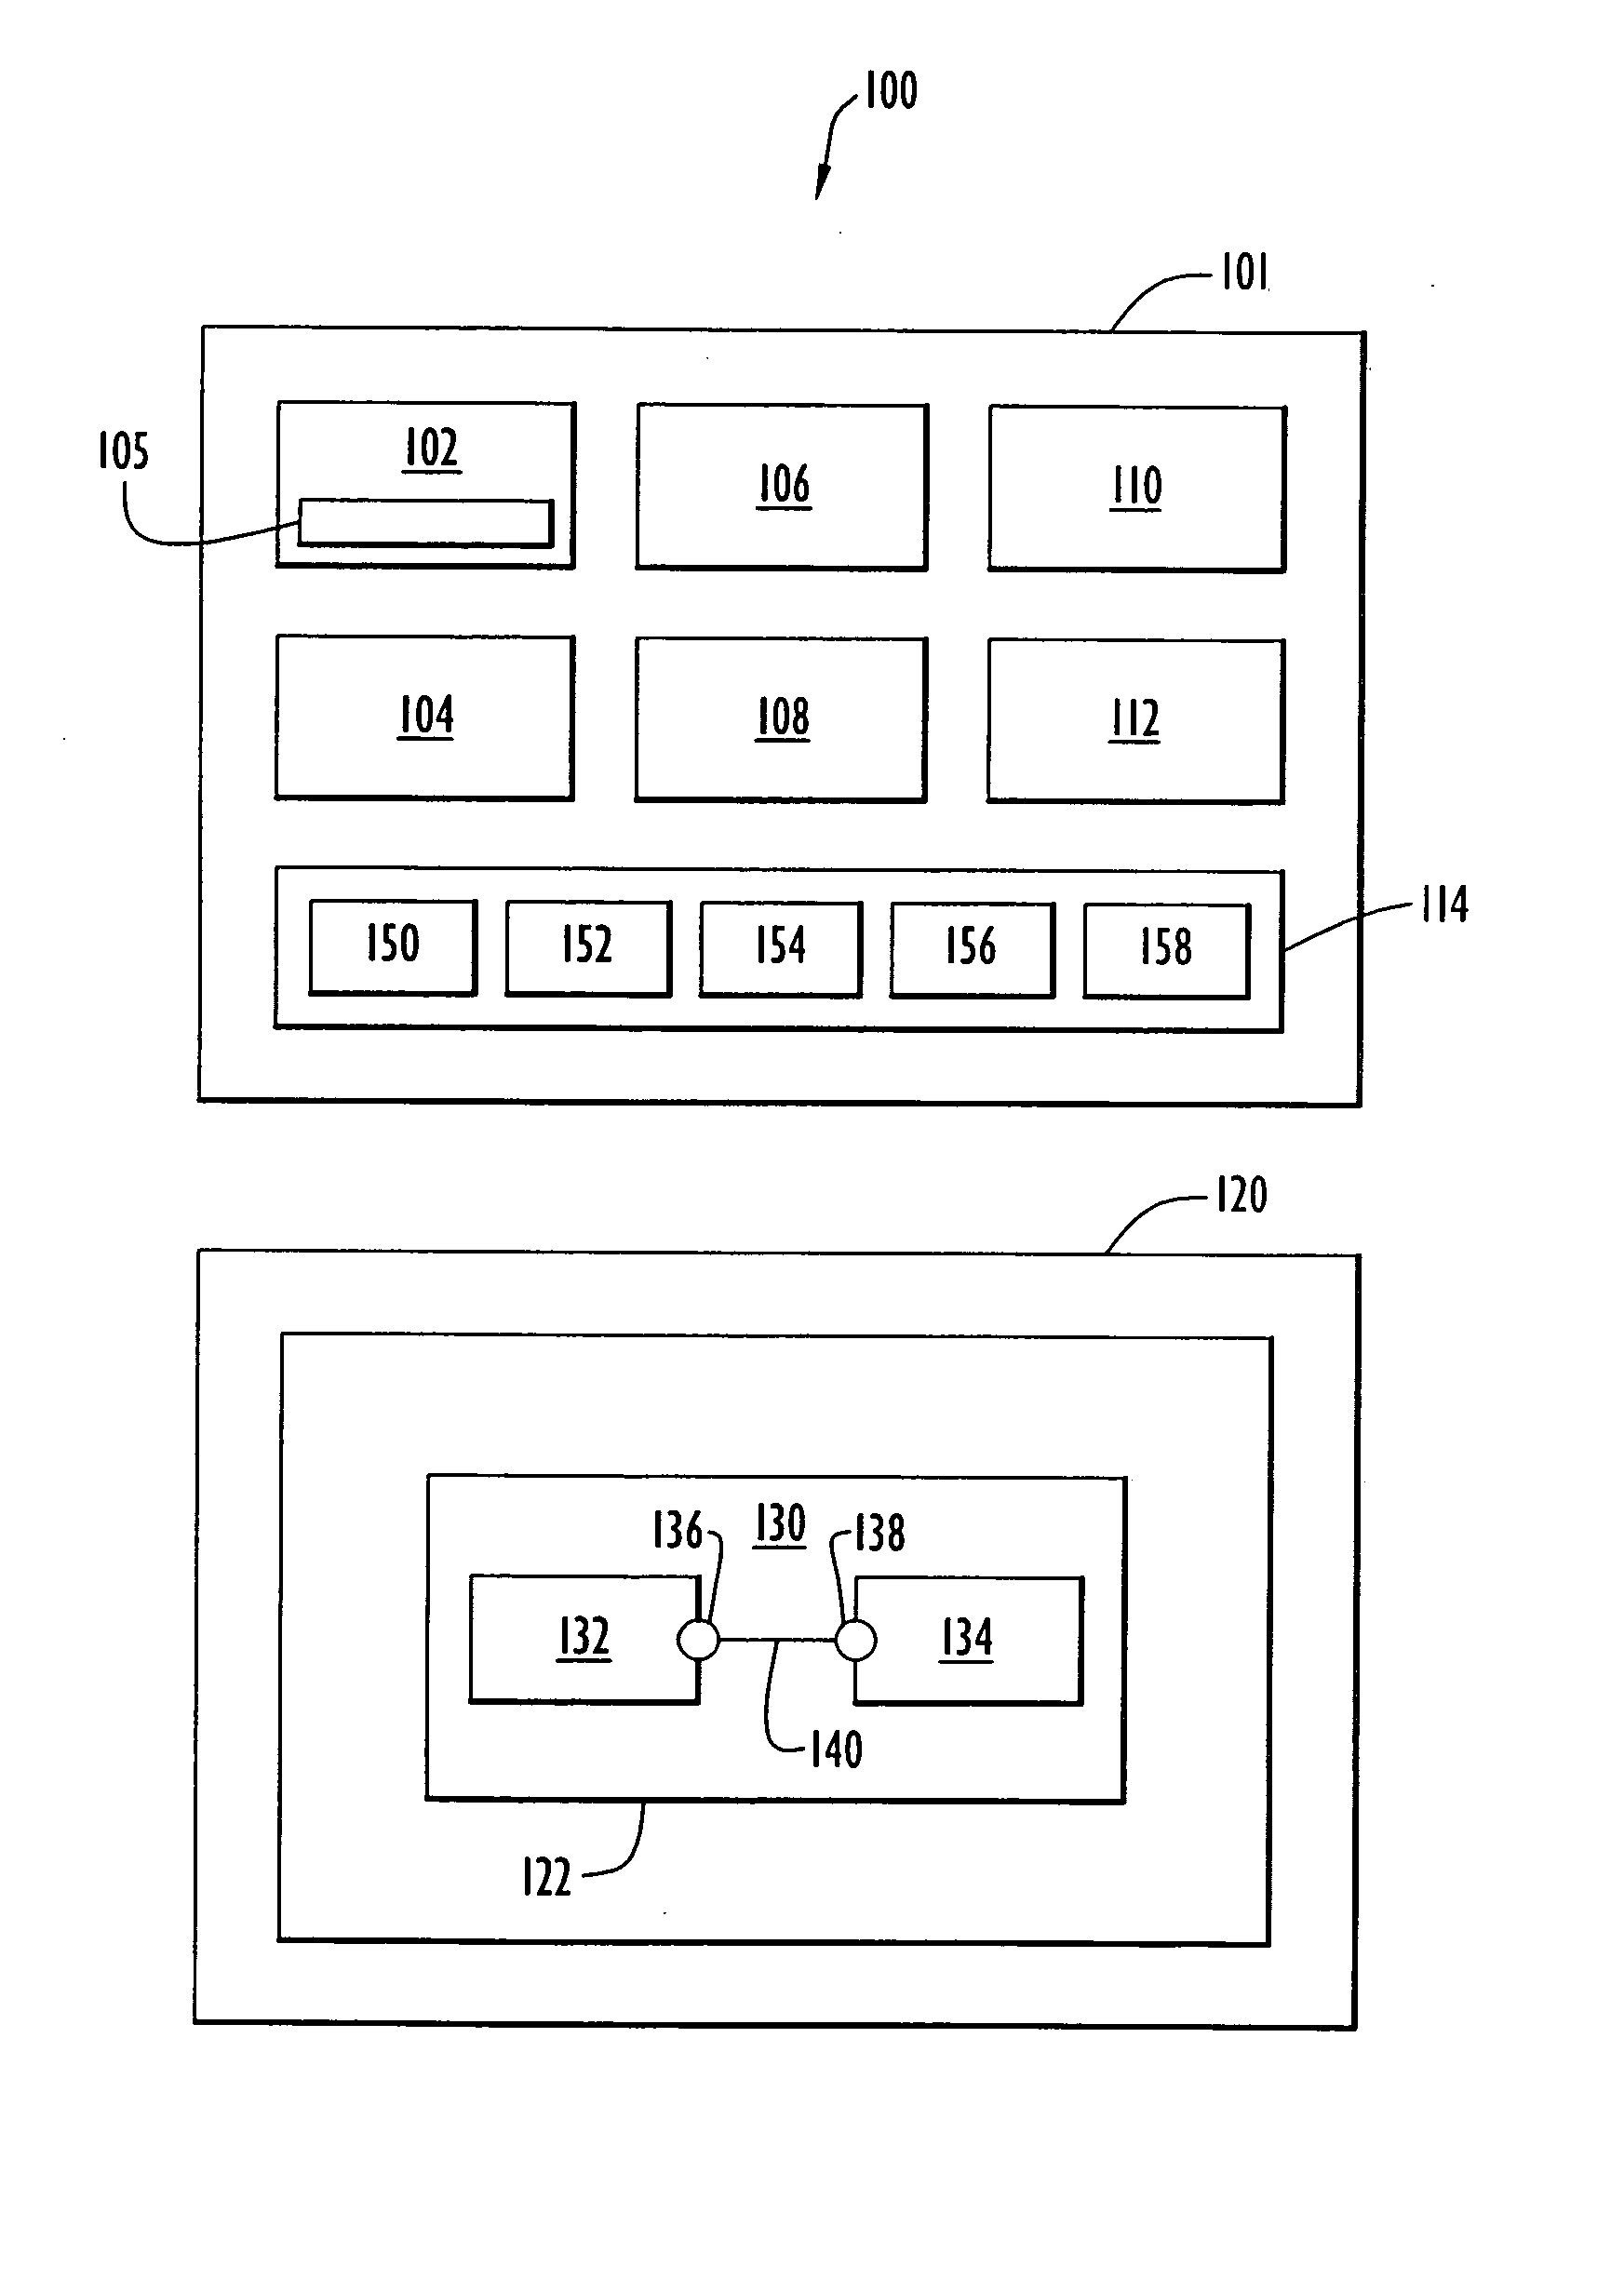 Method and system for displaying performance constraints in a flow design tool